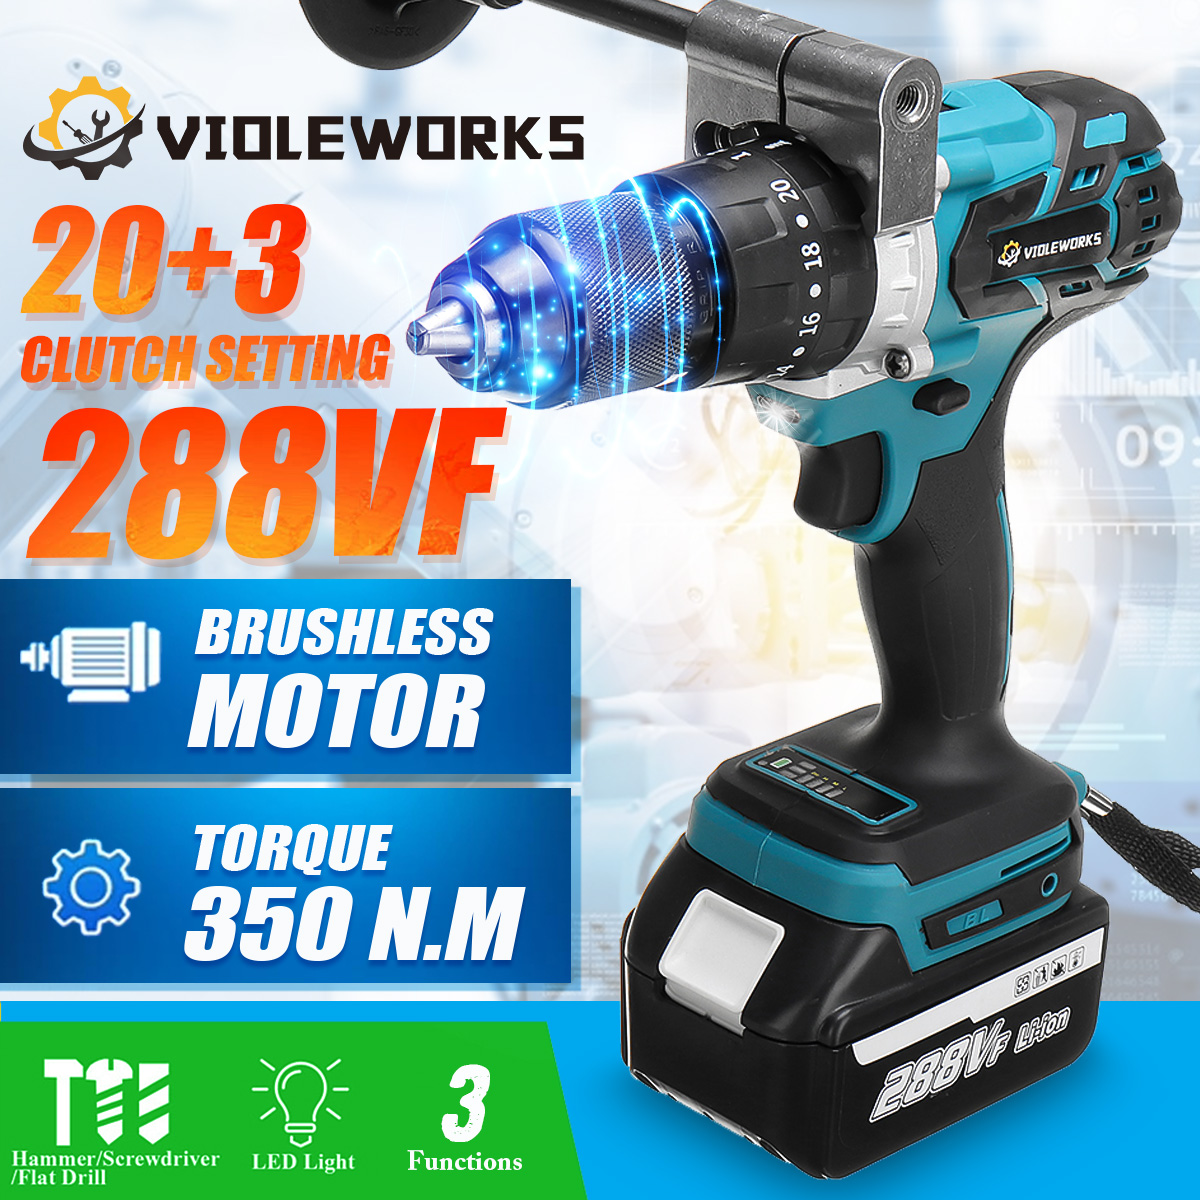 3-IN-1-288VF-Cordless-Drill-Electric-Screwdriver-Hammer-Impact-Drill-203-Torque-W-12pcs-Battery-1847556-2